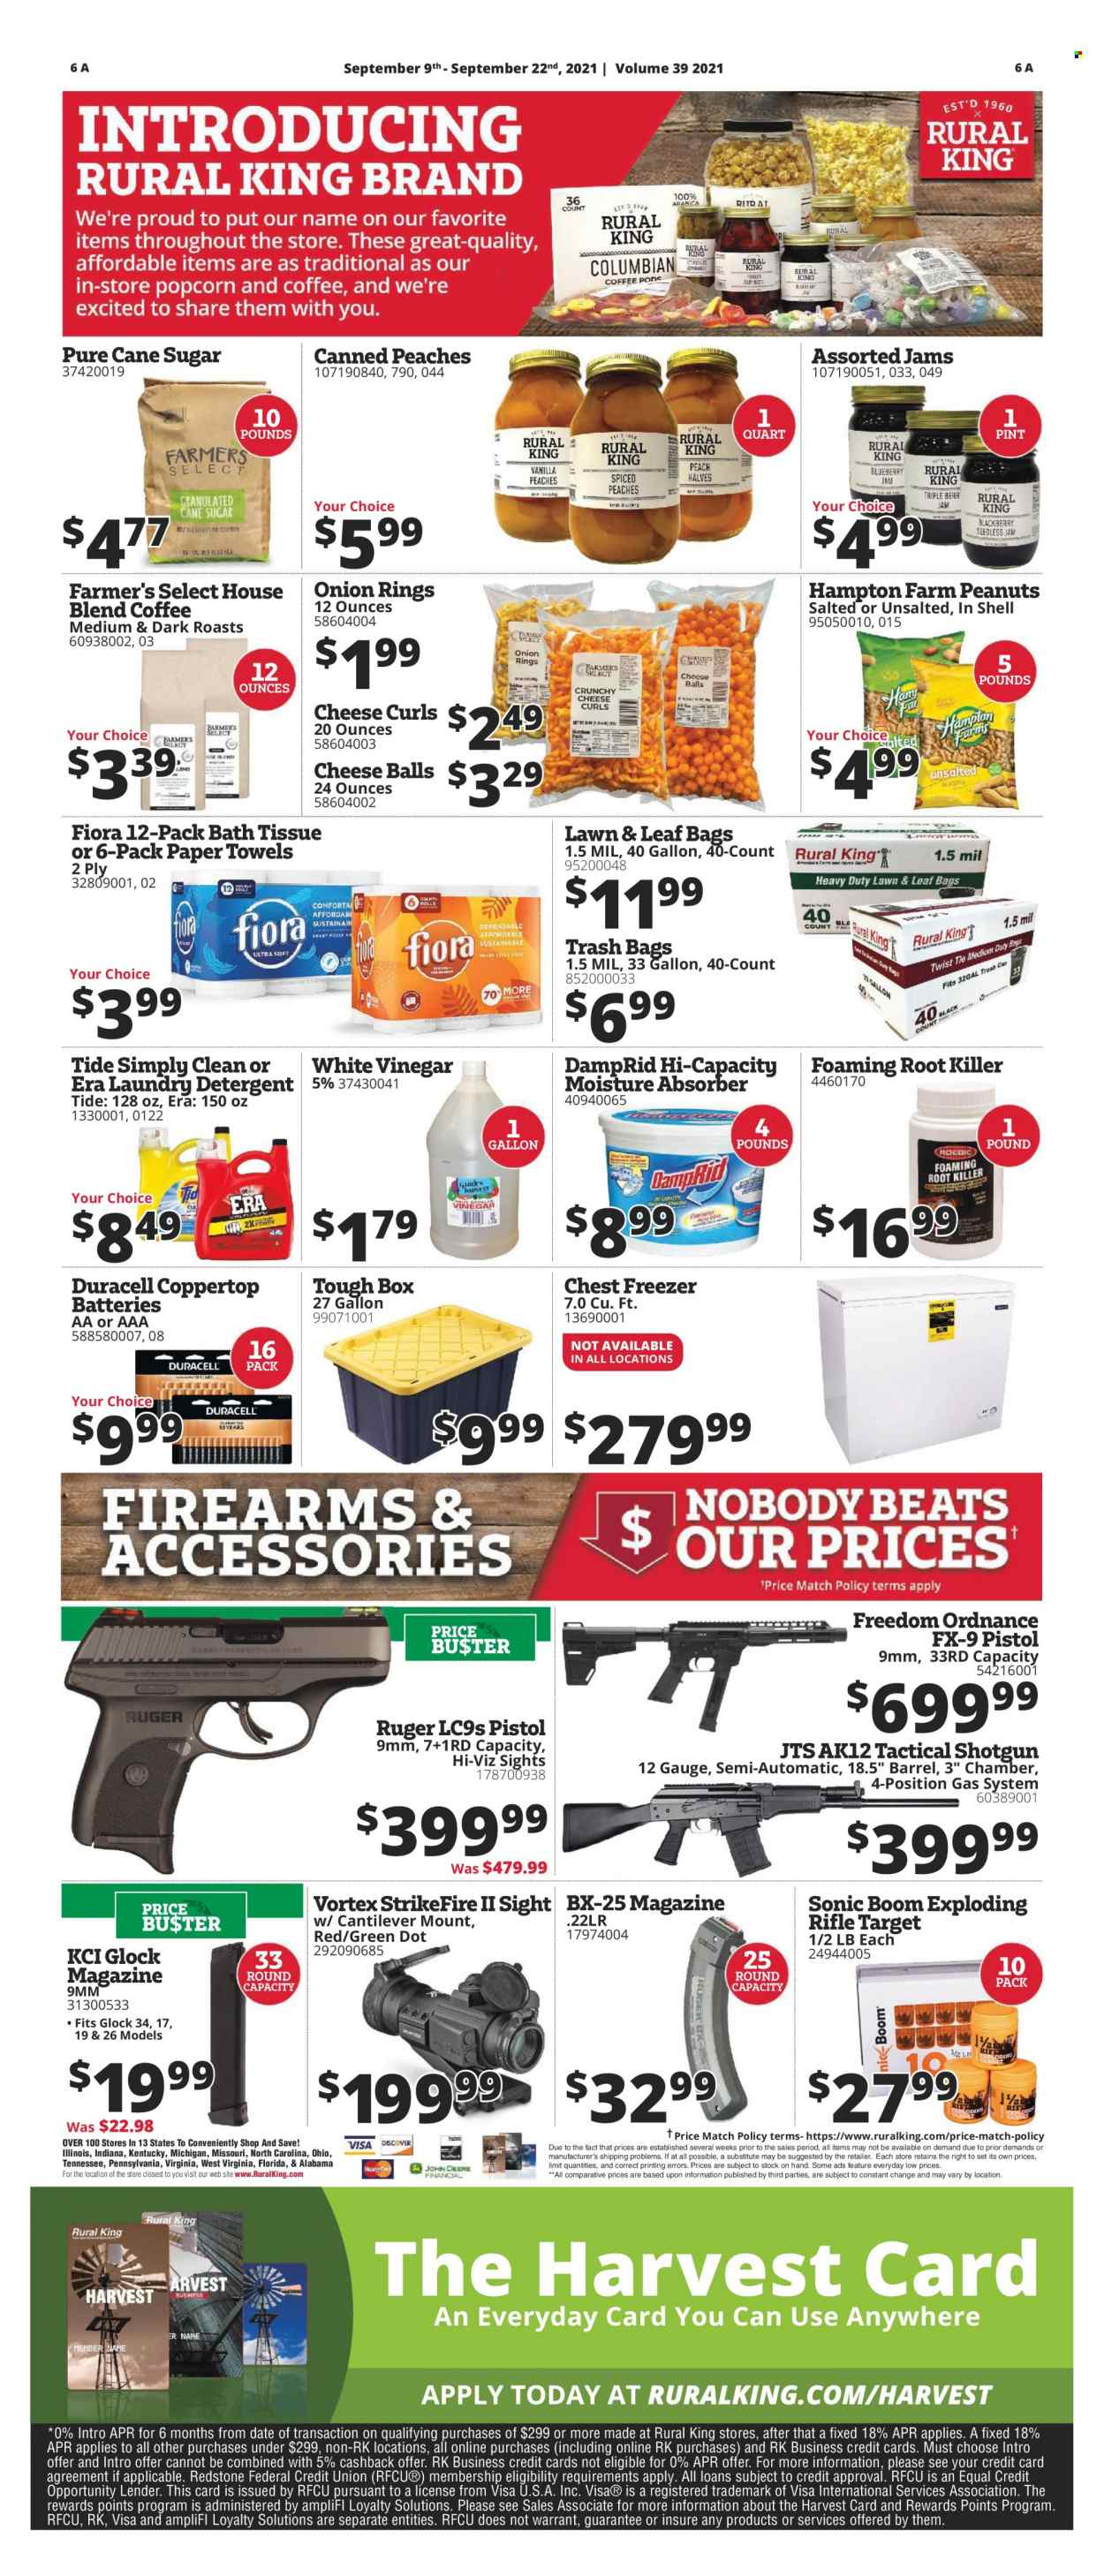 thumbnail - Rural King Flyer - 09/09/2021 - 09/22/2021 - Sales products - onion rings, cane sugar, sugar, vinegar, peanuts, coffee, Tide, laundry detergent, trash bags, Target, battery, Duracell, kitchen towels, freezer, chest freezer, glock, Ruger, shotgun, pistol, Shell. Page 6.